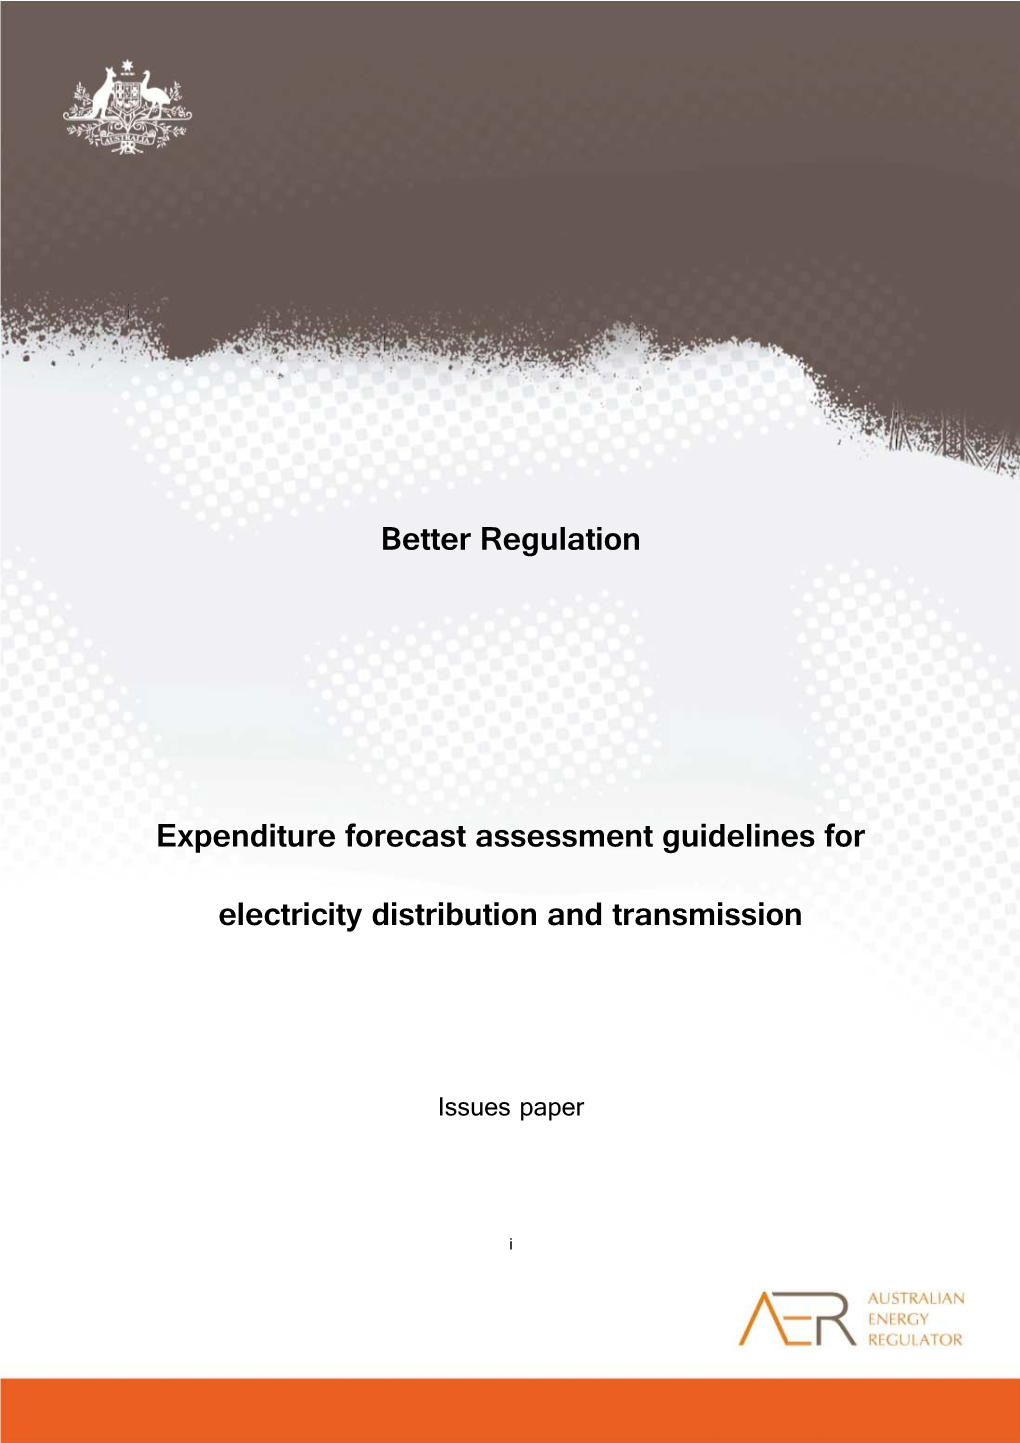 Expenditure Forecast Assessment Guidelines for Electricity Distribution and Transmission